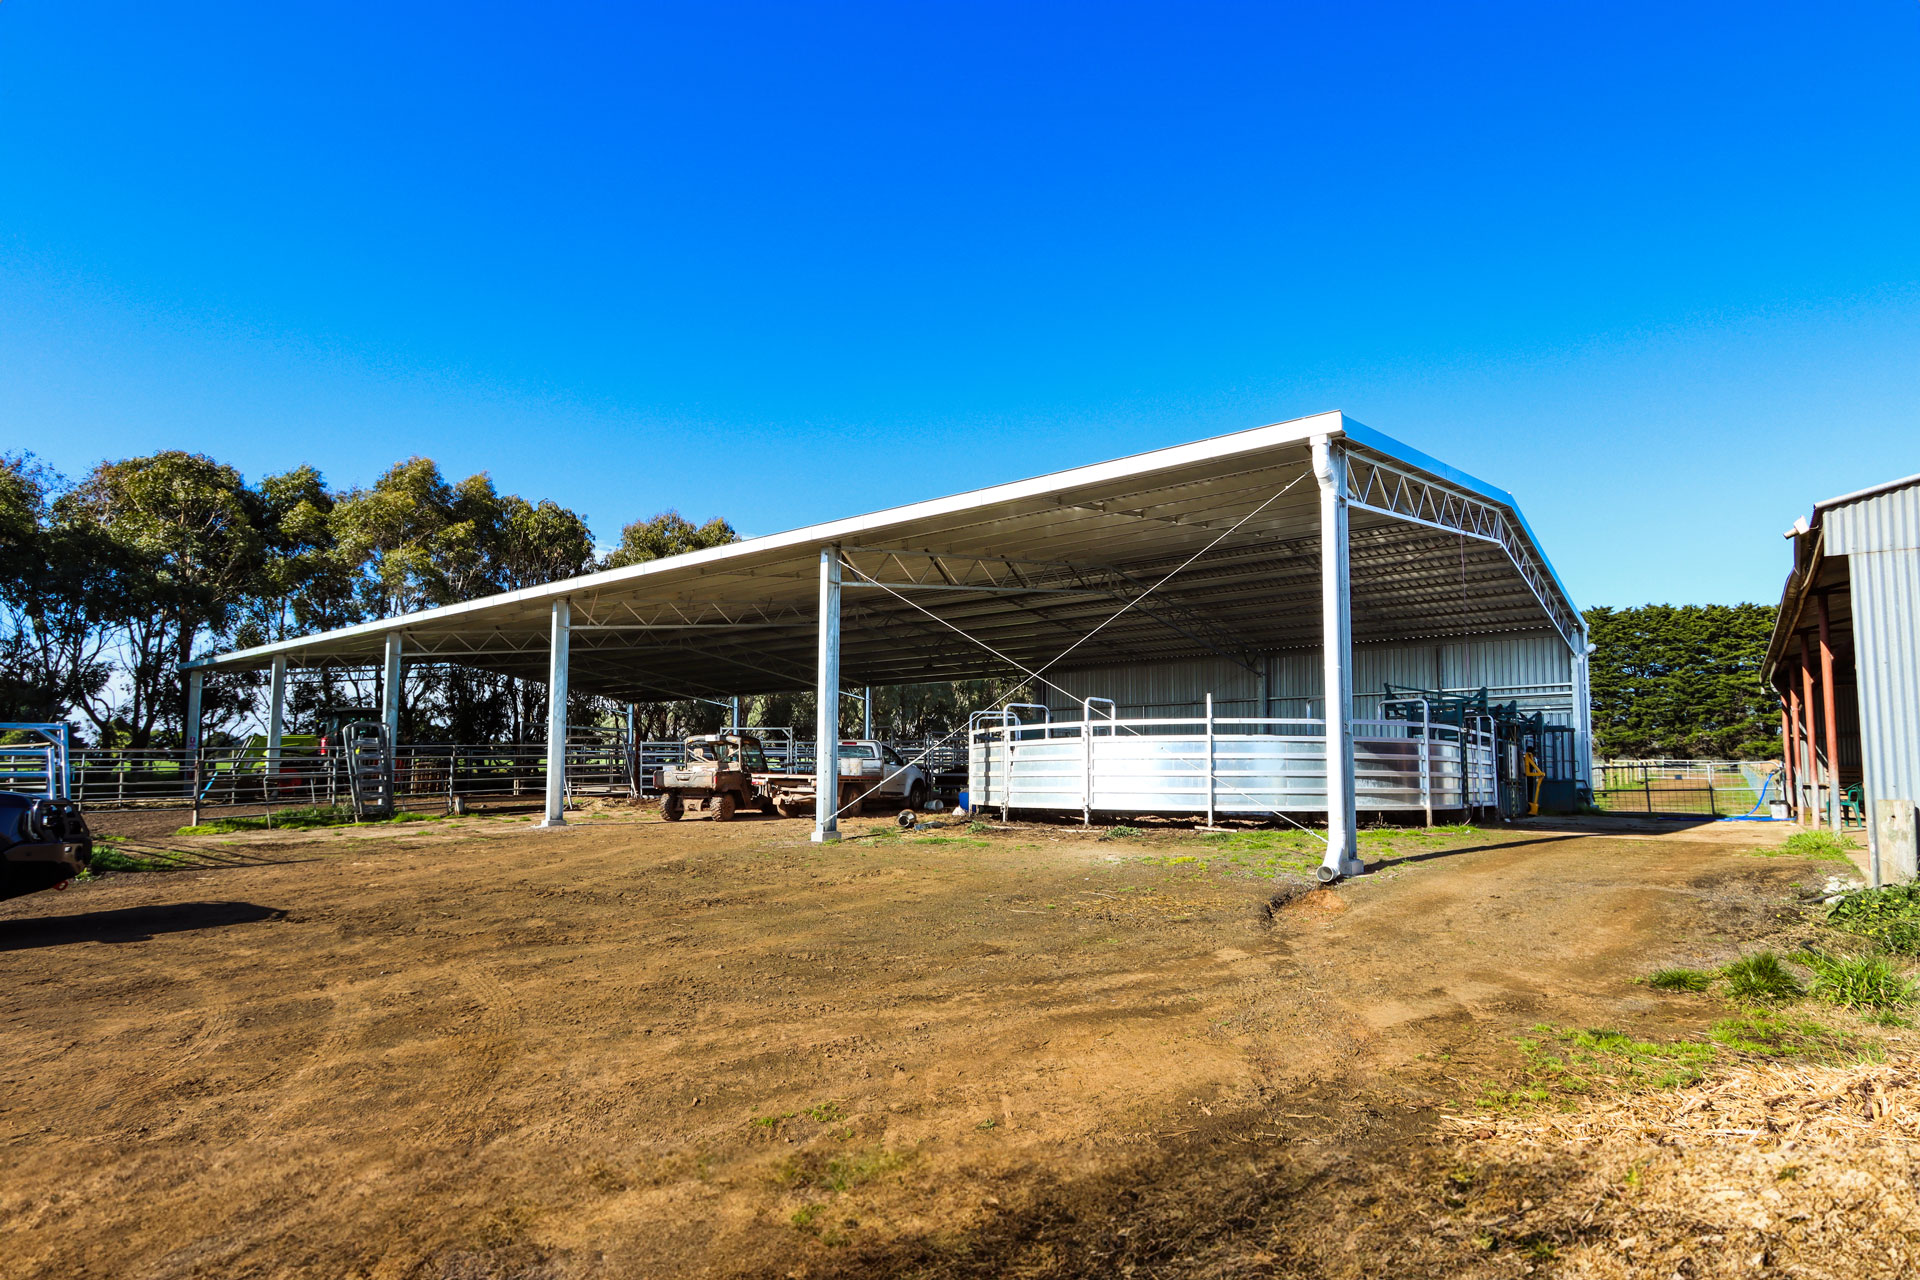 You are currently viewing 40m x 18m x 4m cattle yard cover